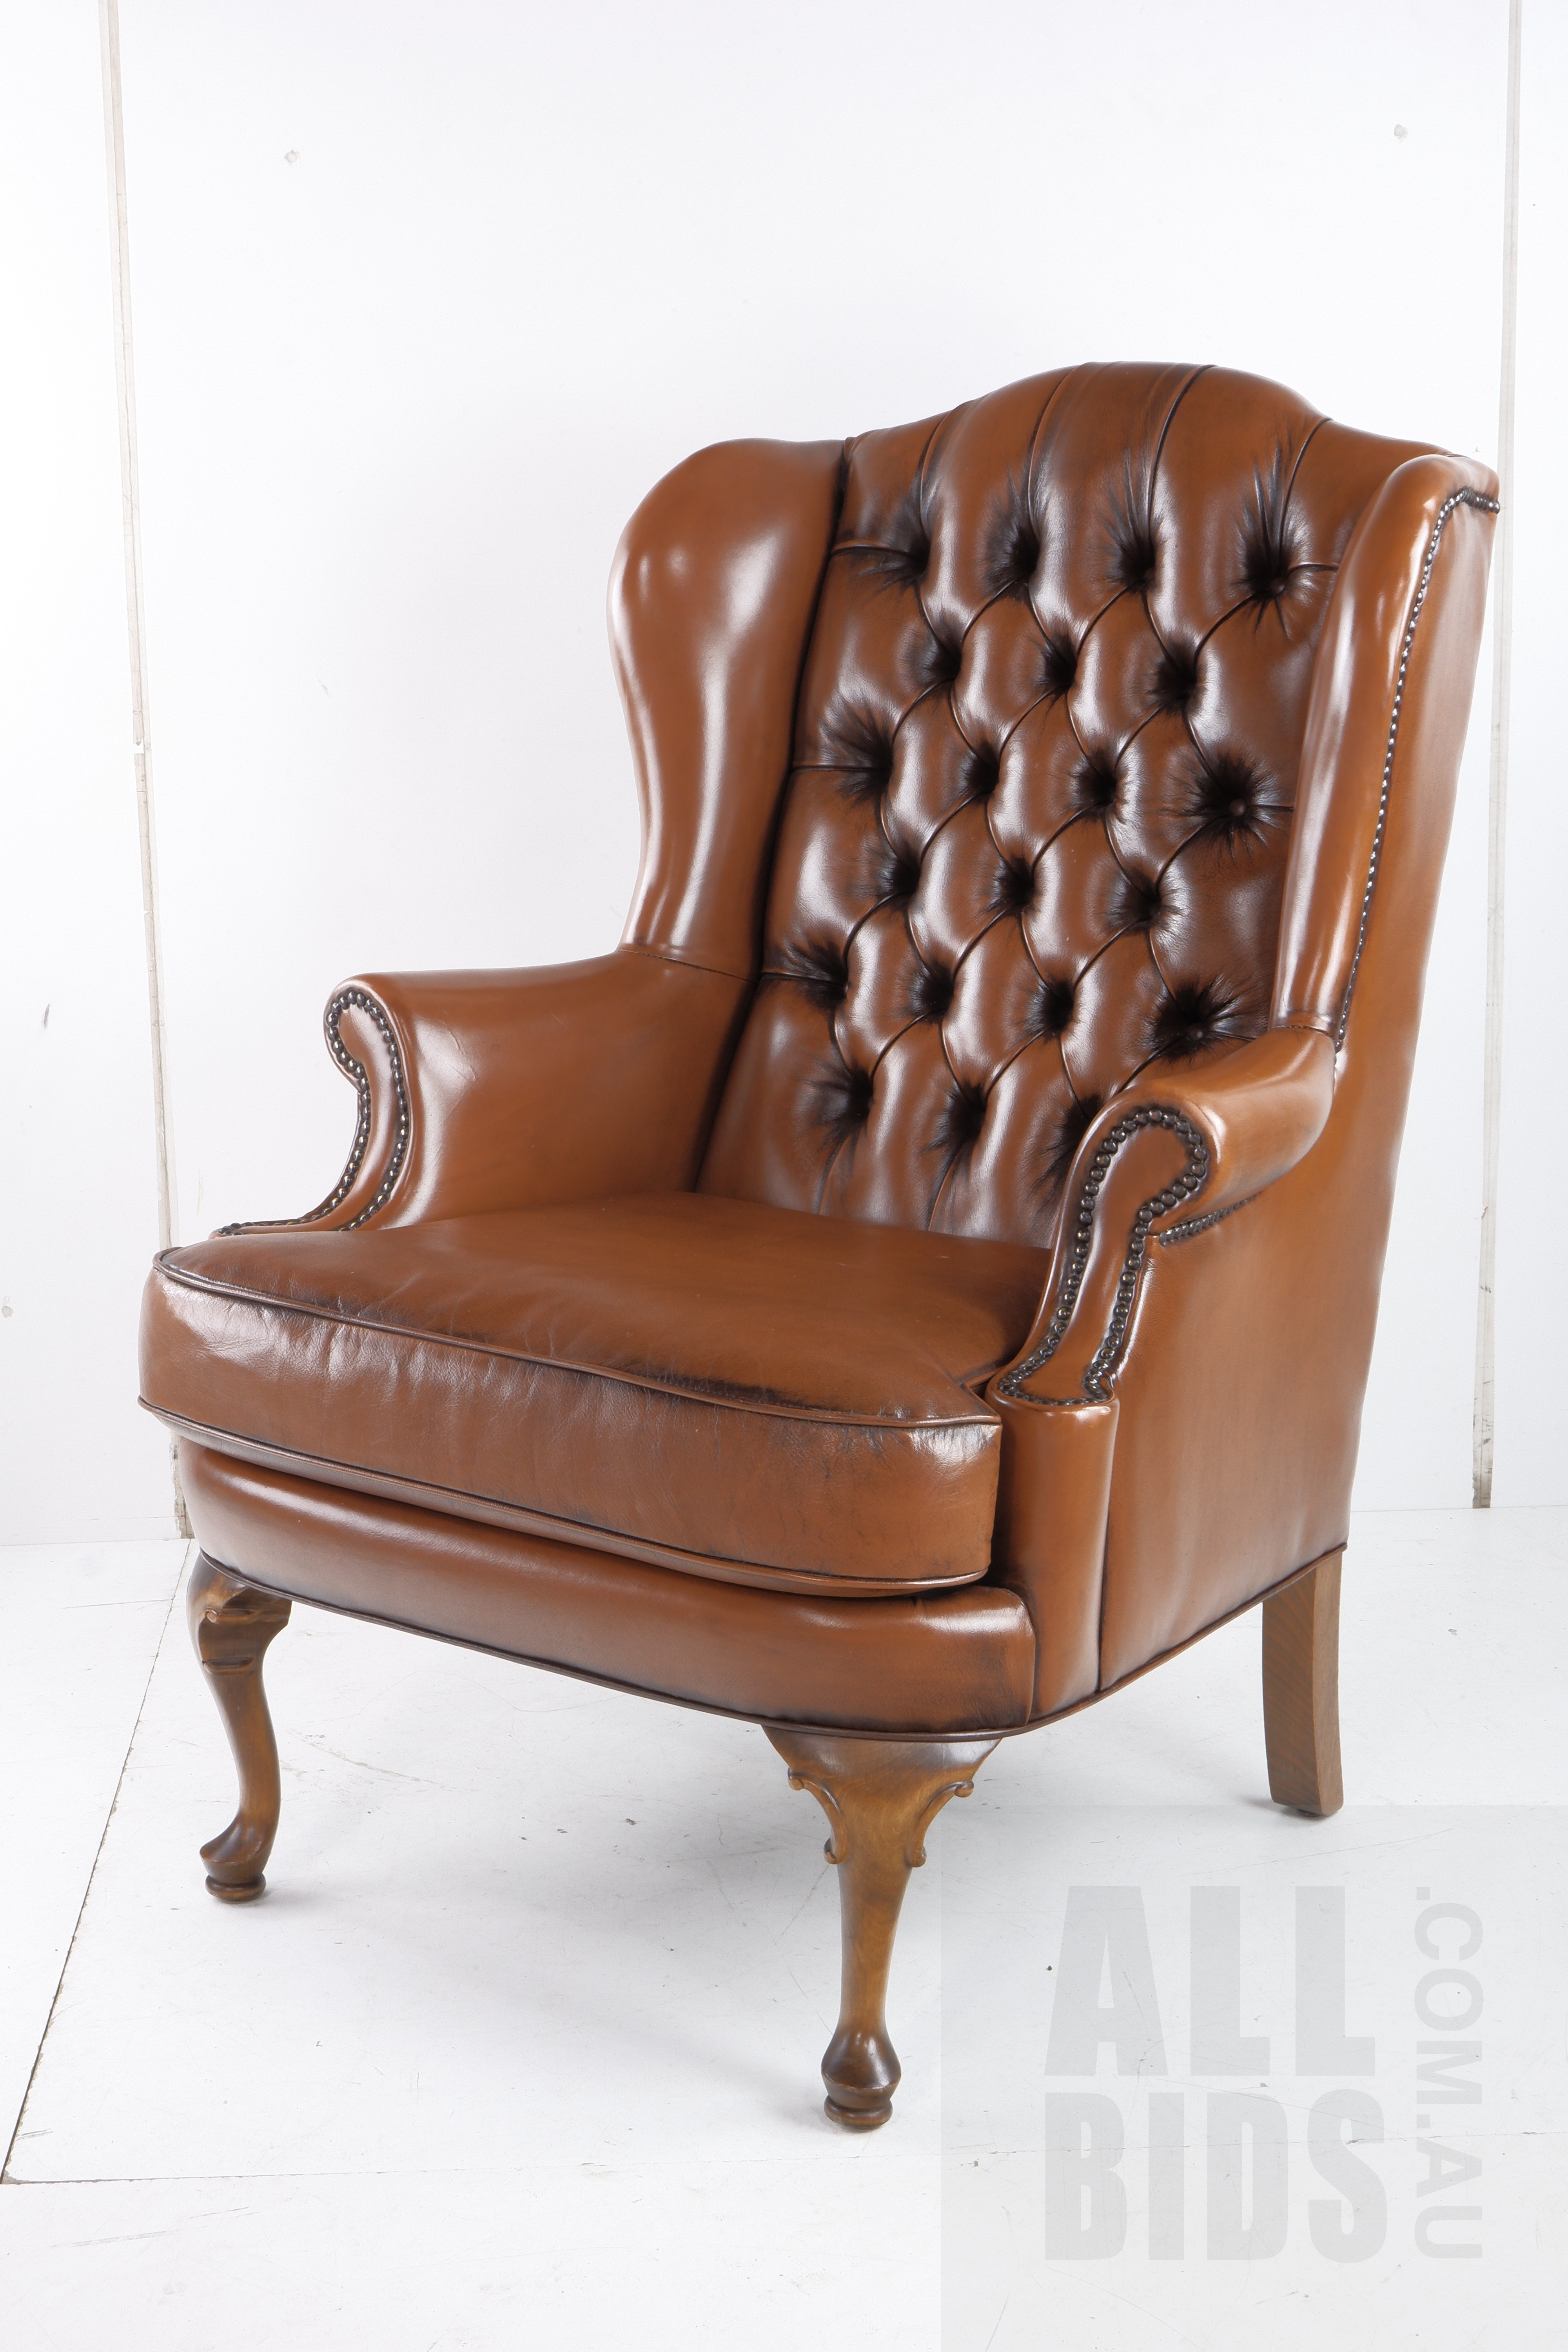 'Moran Tan Leather Deep Buttoned Chesterfield Wingback Armchair'